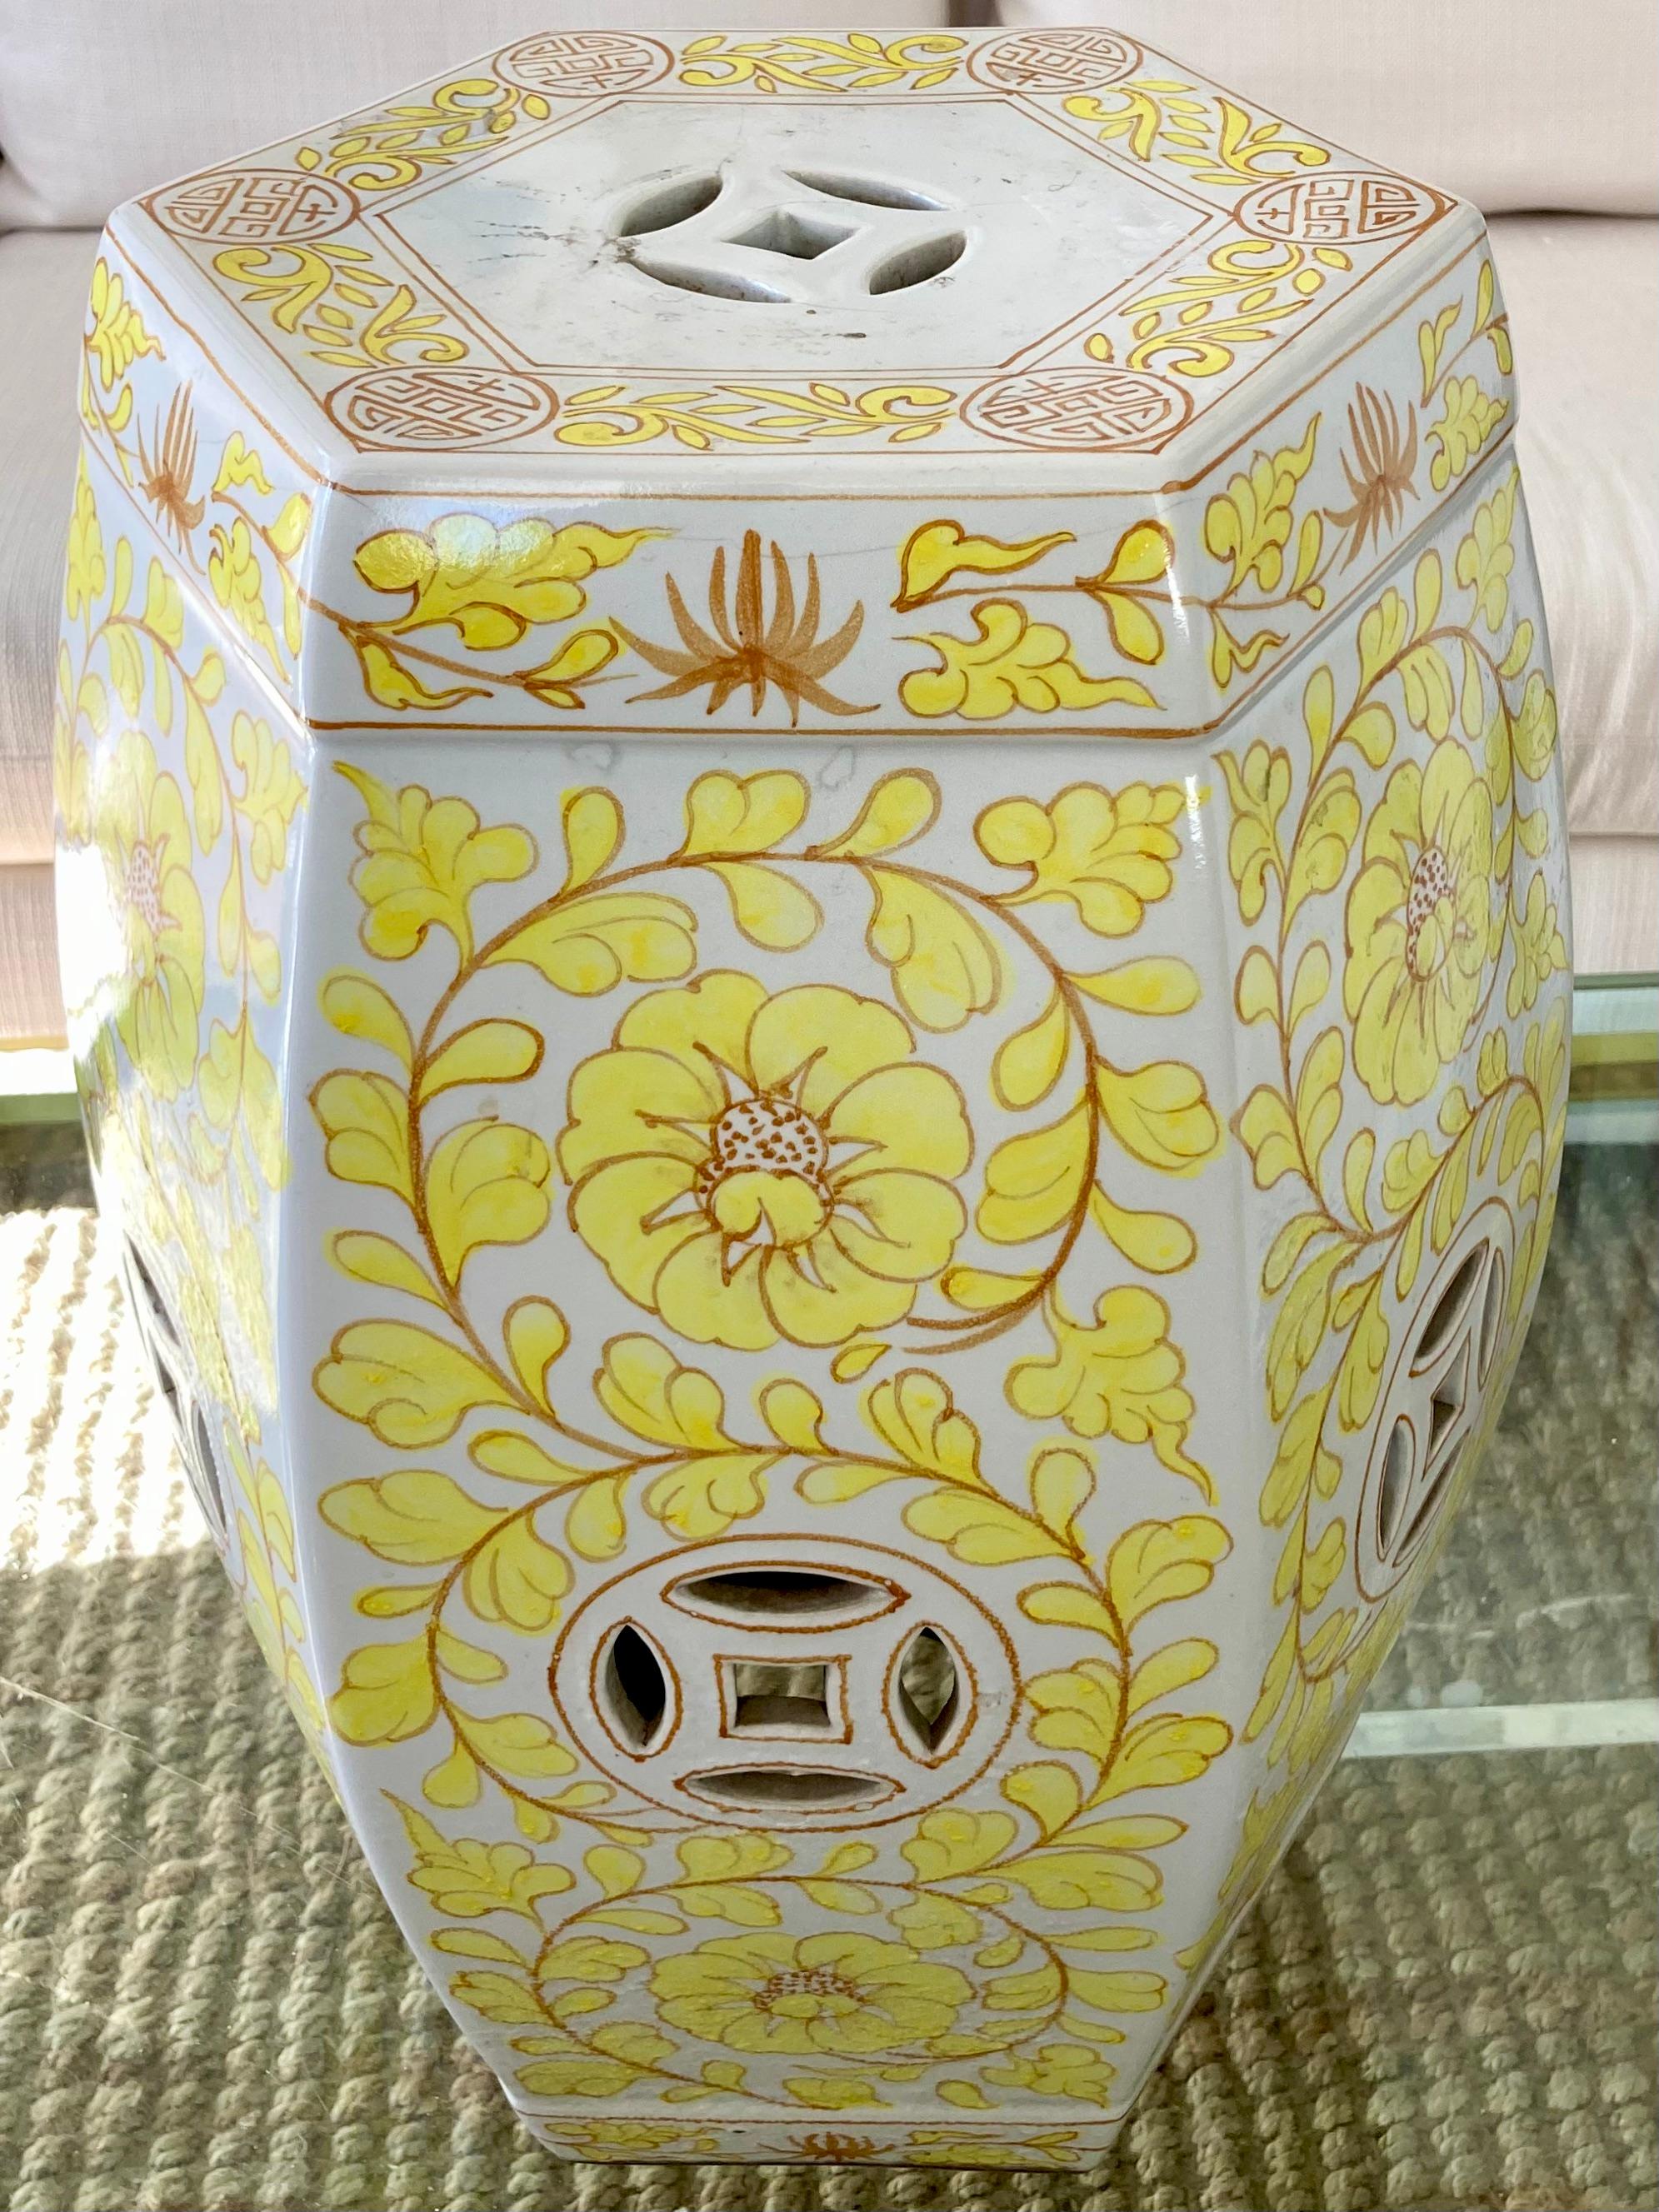 Other Yellow and White Glazed Ceramic Garden Seat For Sale